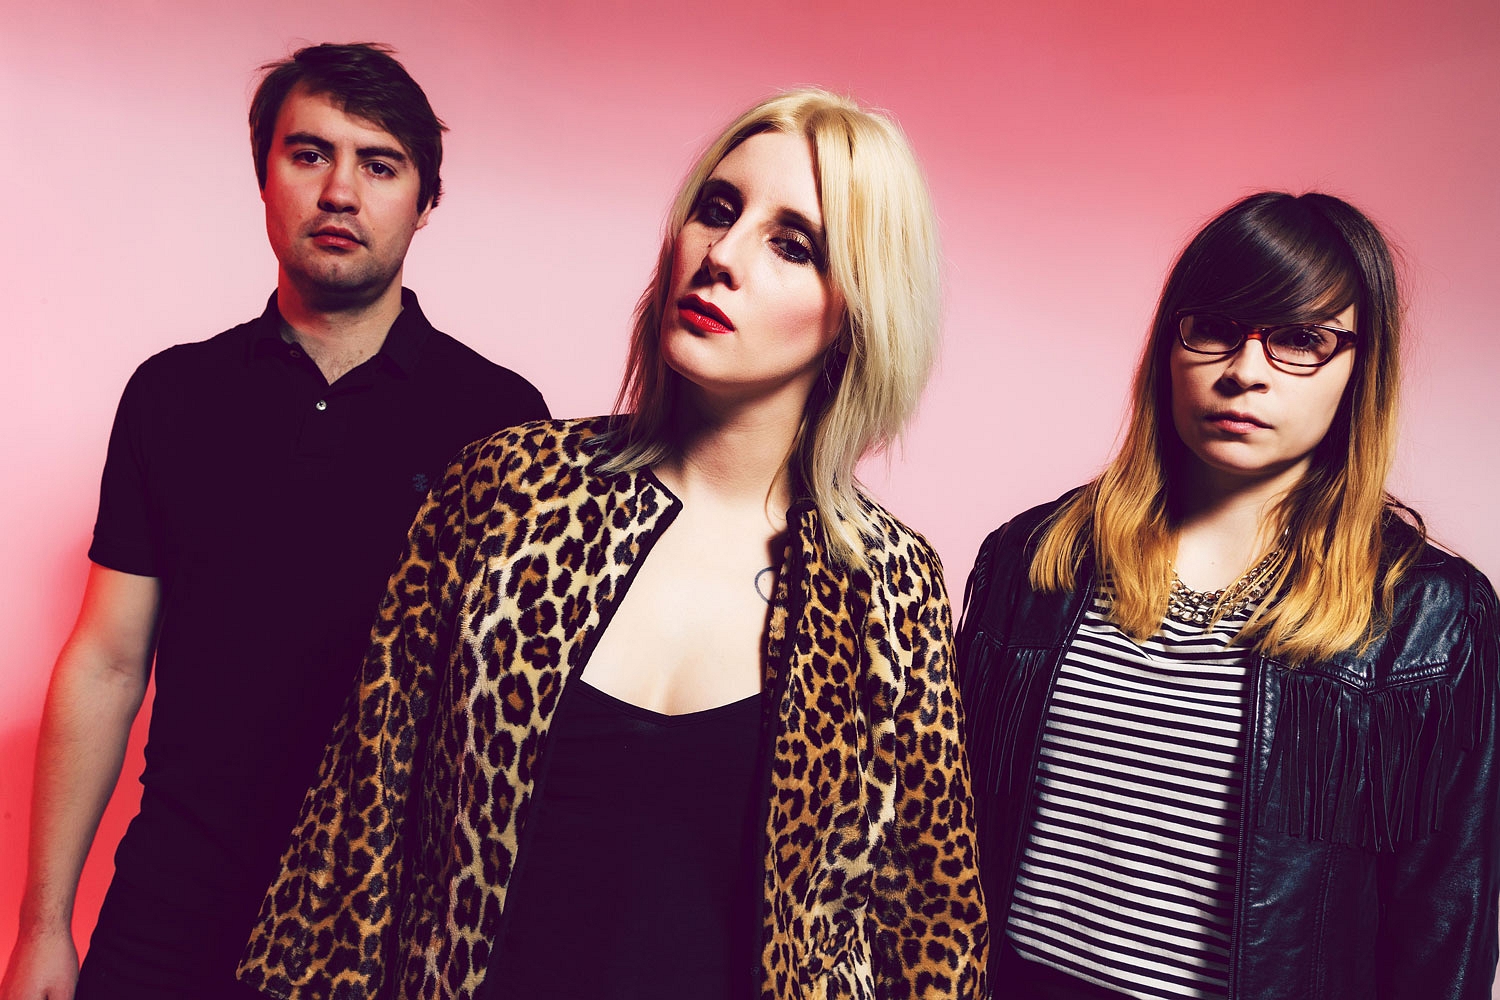 White Lung get chatty in their new ‘Sister’ video